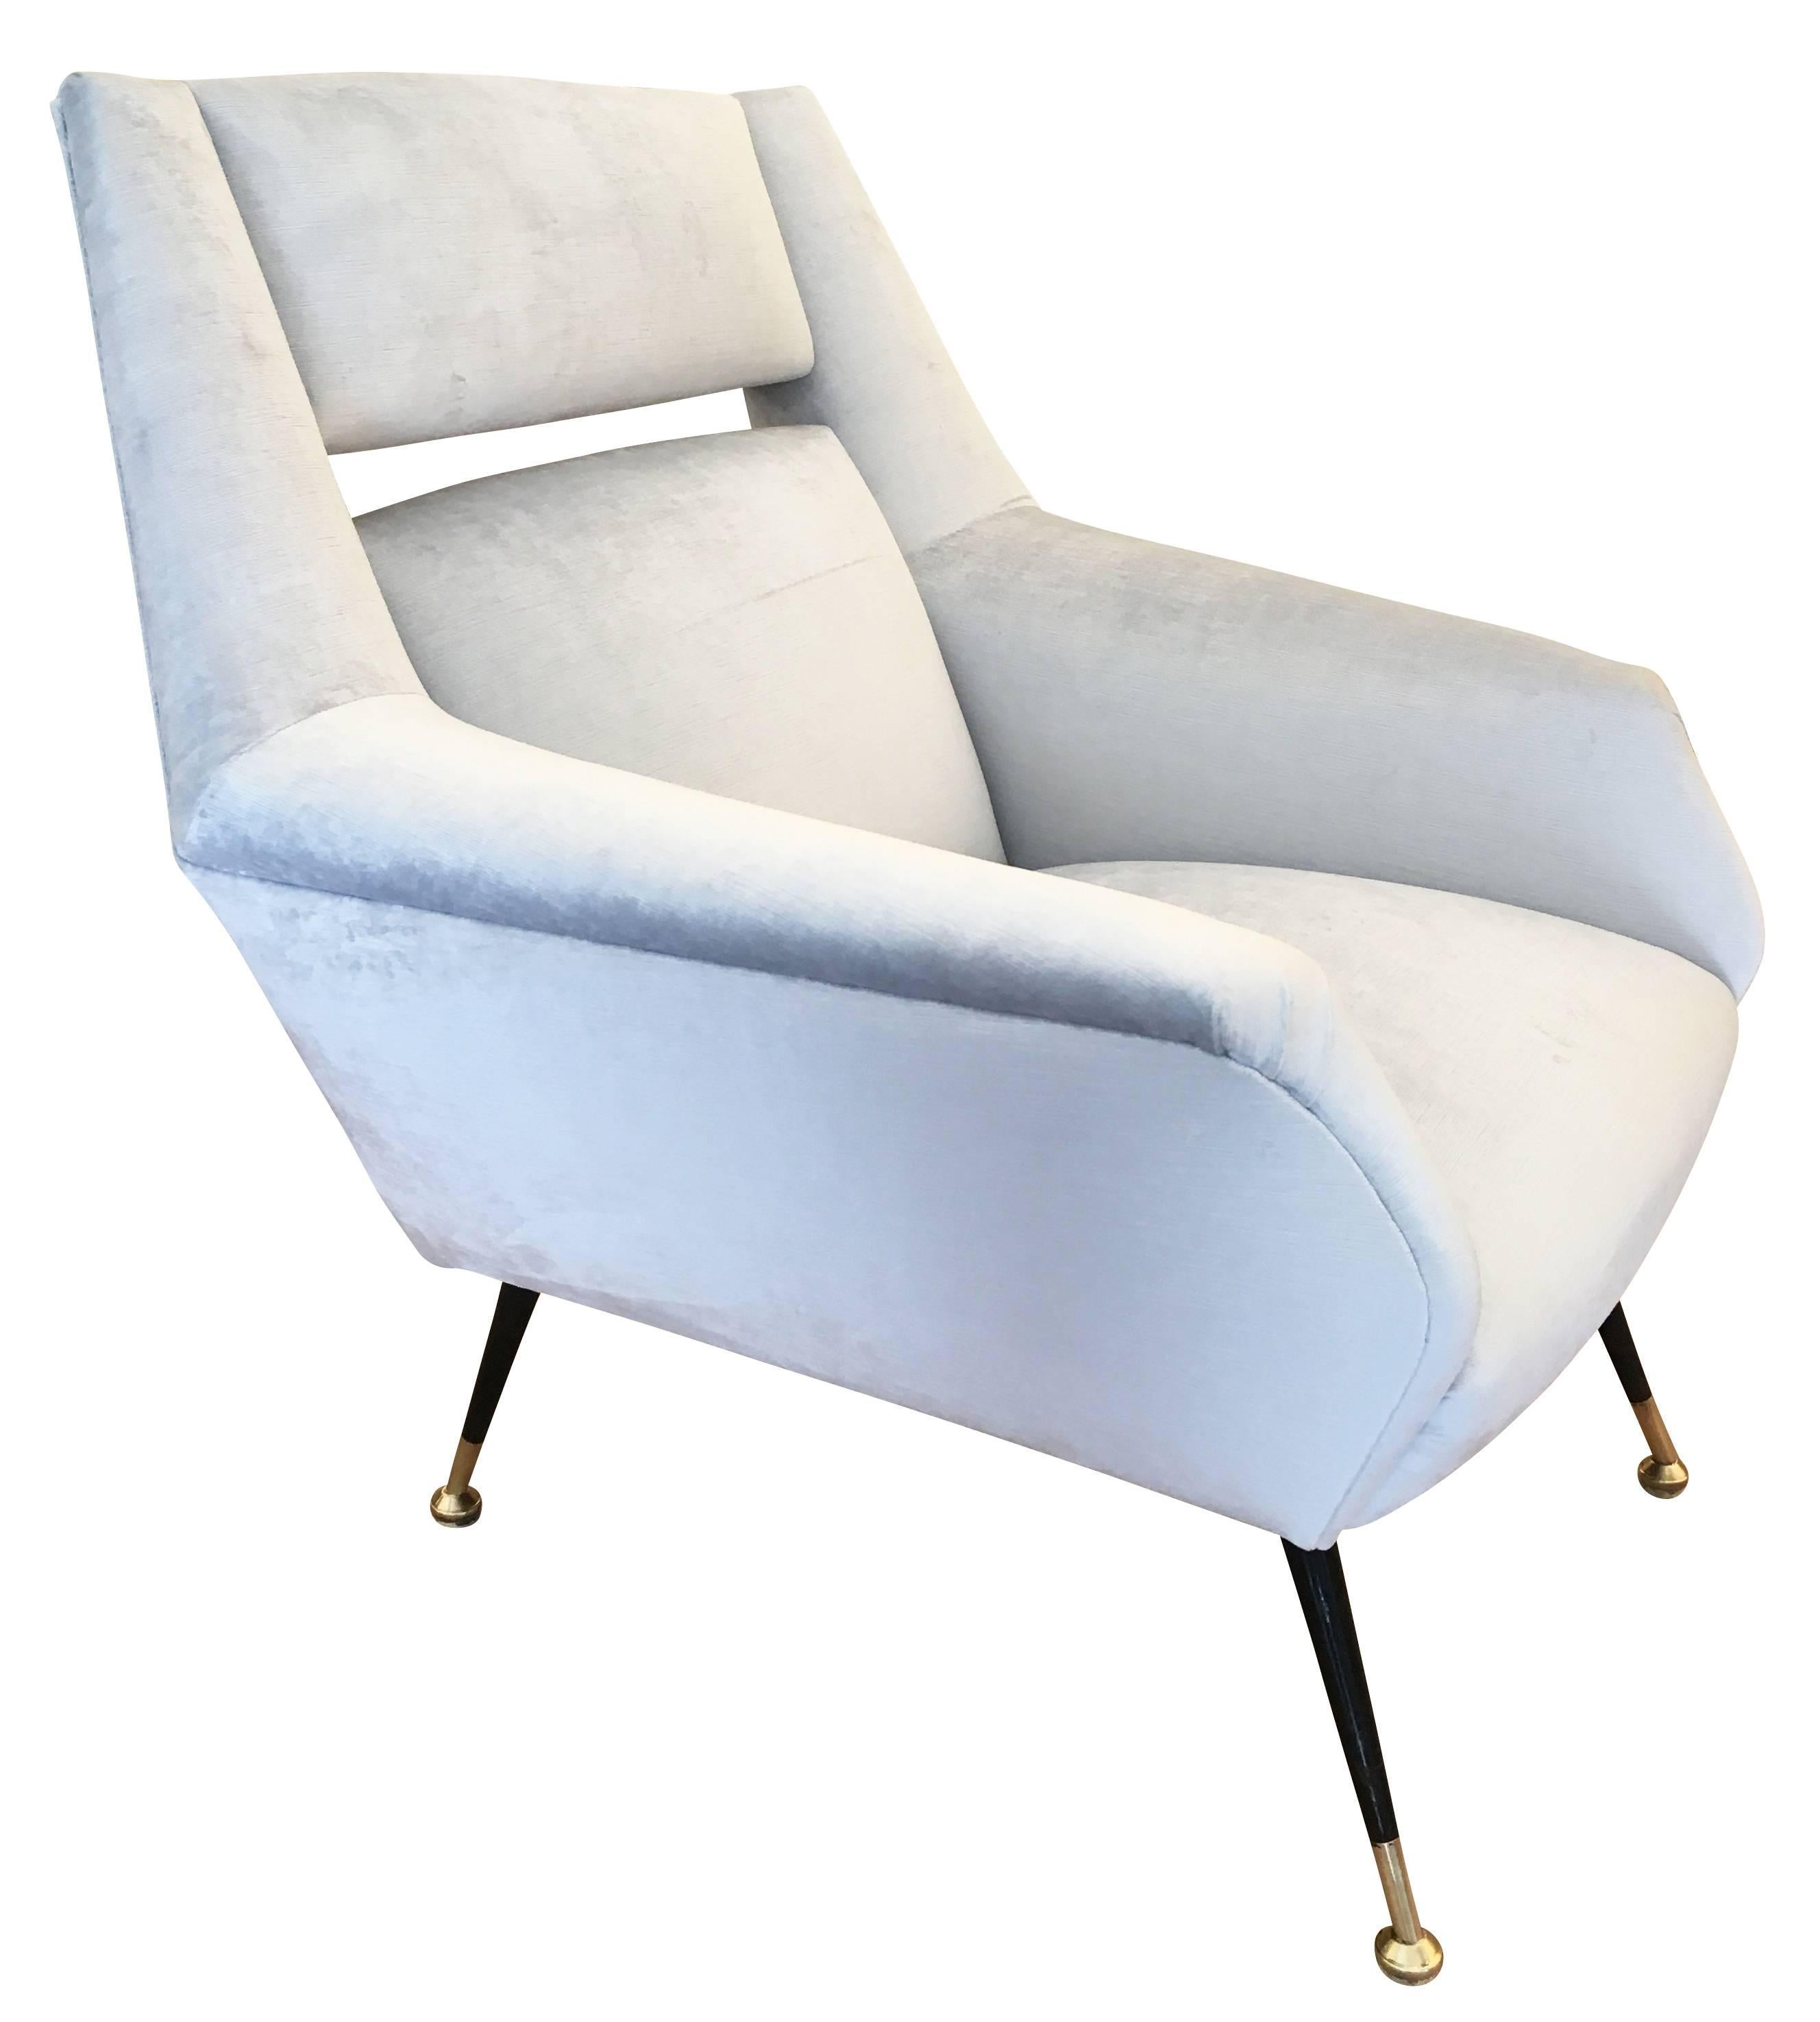 Chic Italian midcentury armchairs in the style of Gio Ponti with a slit back. The legs are lacquered black with brass feet. One has been re-upholstered in a light blue velvet for display purposes and the other is still with the original fabric. For